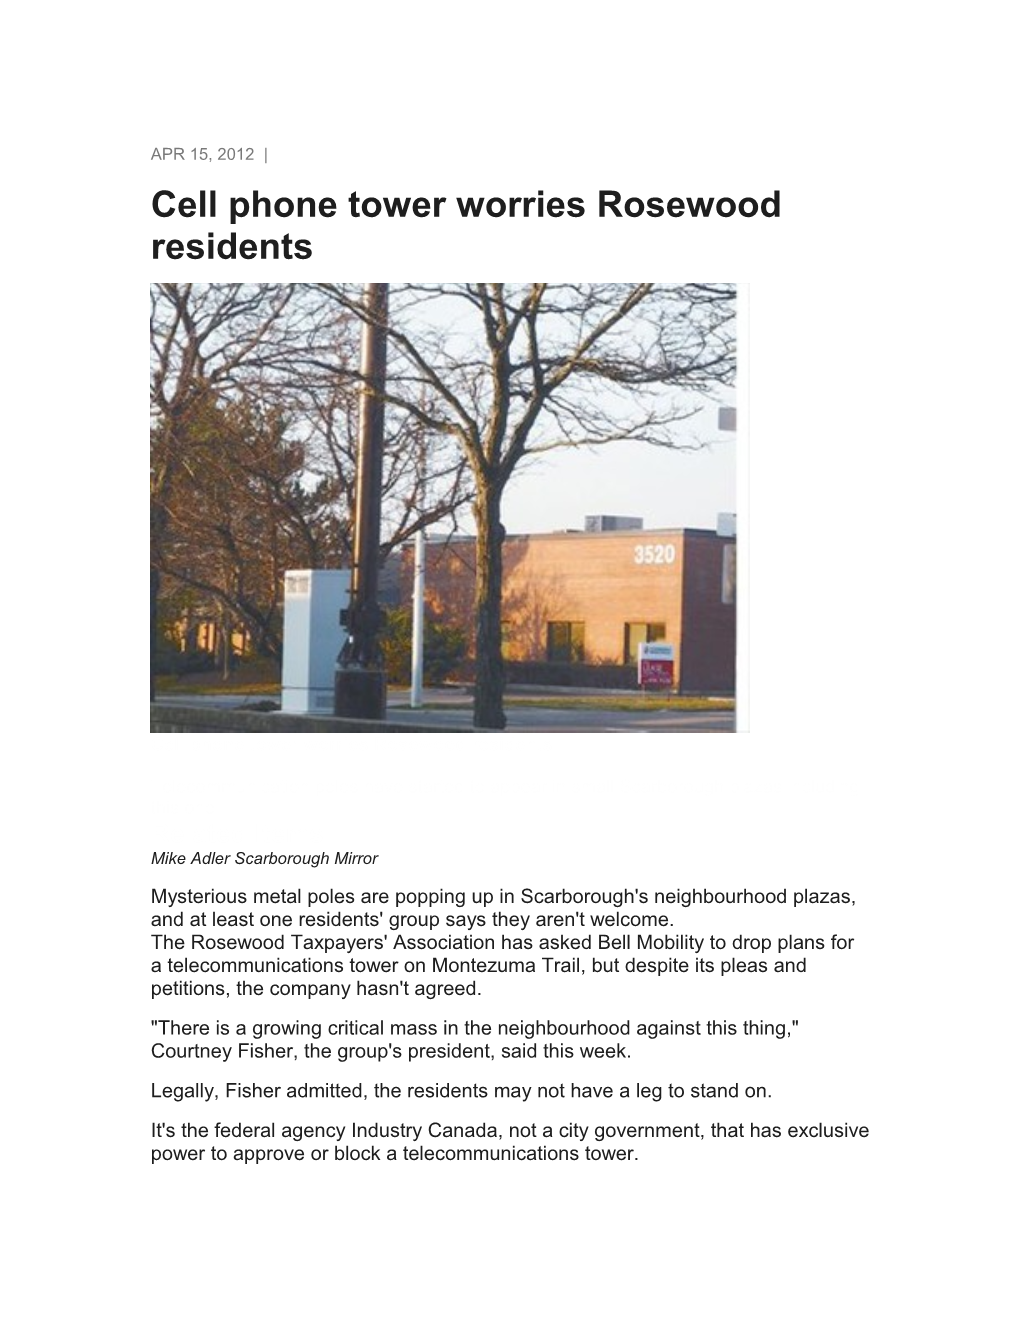 Cell Phone Tower Worries Rosewood Residents